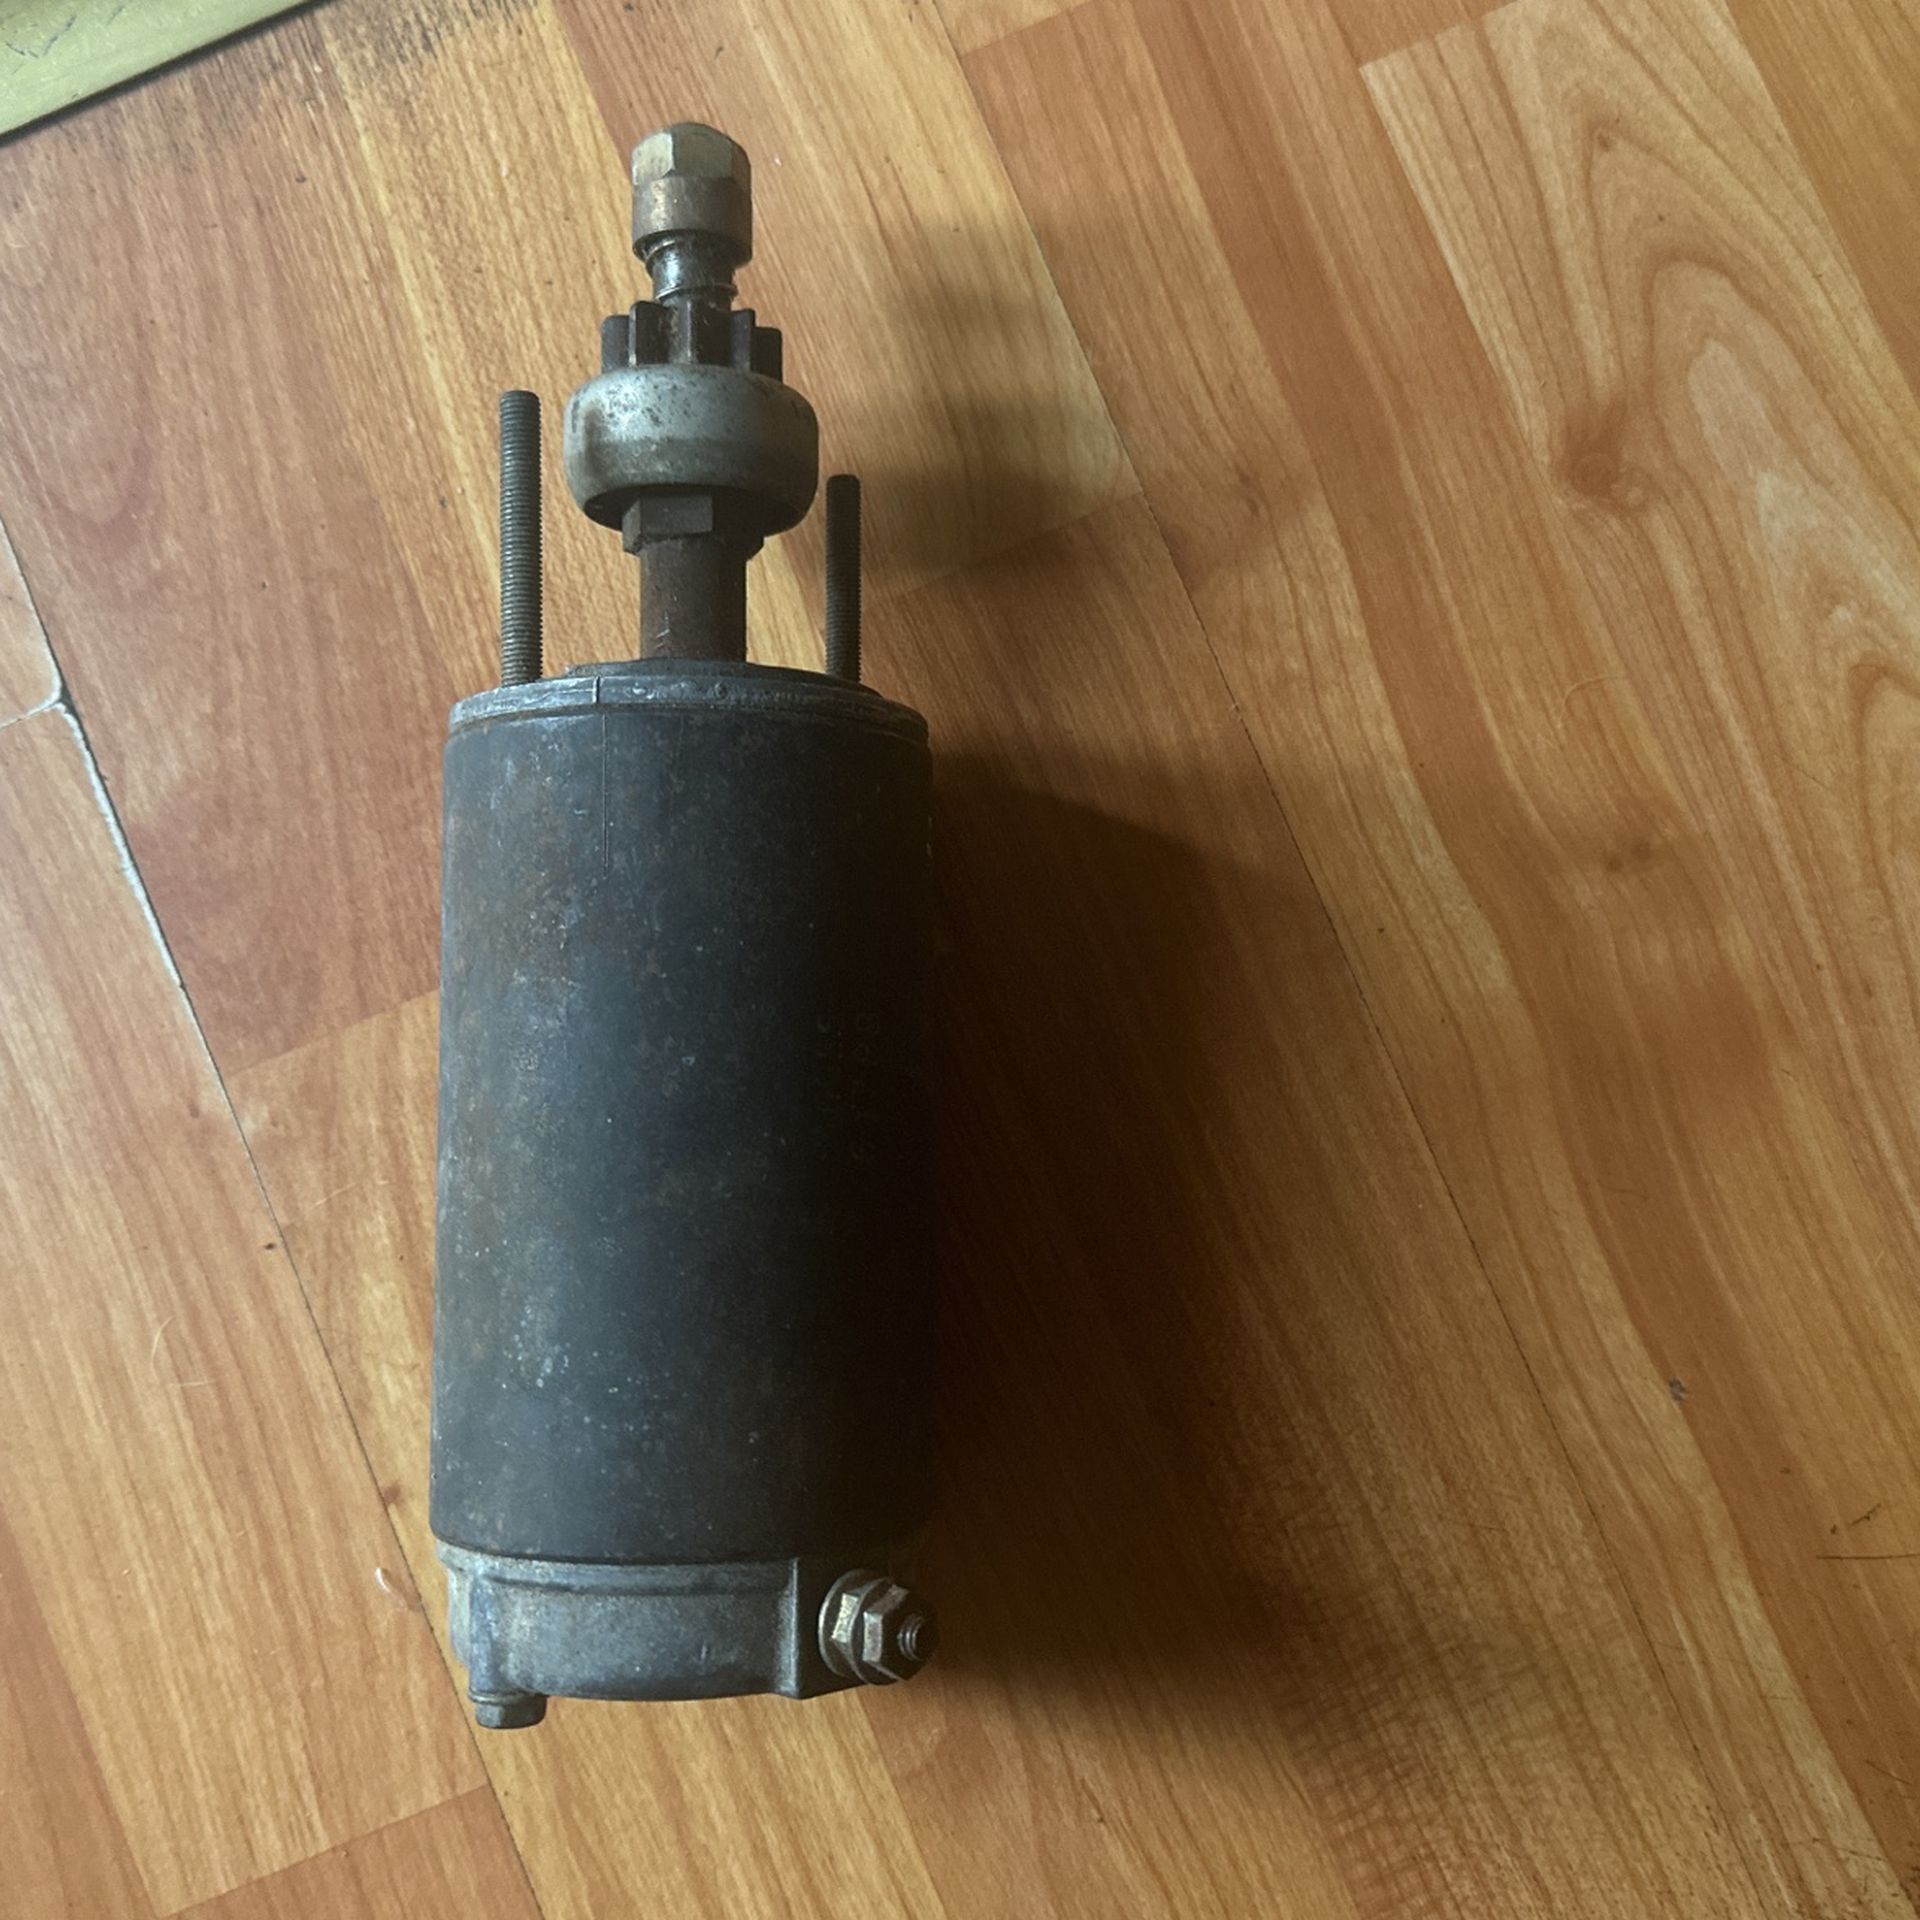 Starter for Mercury Mariner Outboard 90, 100, 110, 115hp 1(contact info removed) (contact info removed)1 